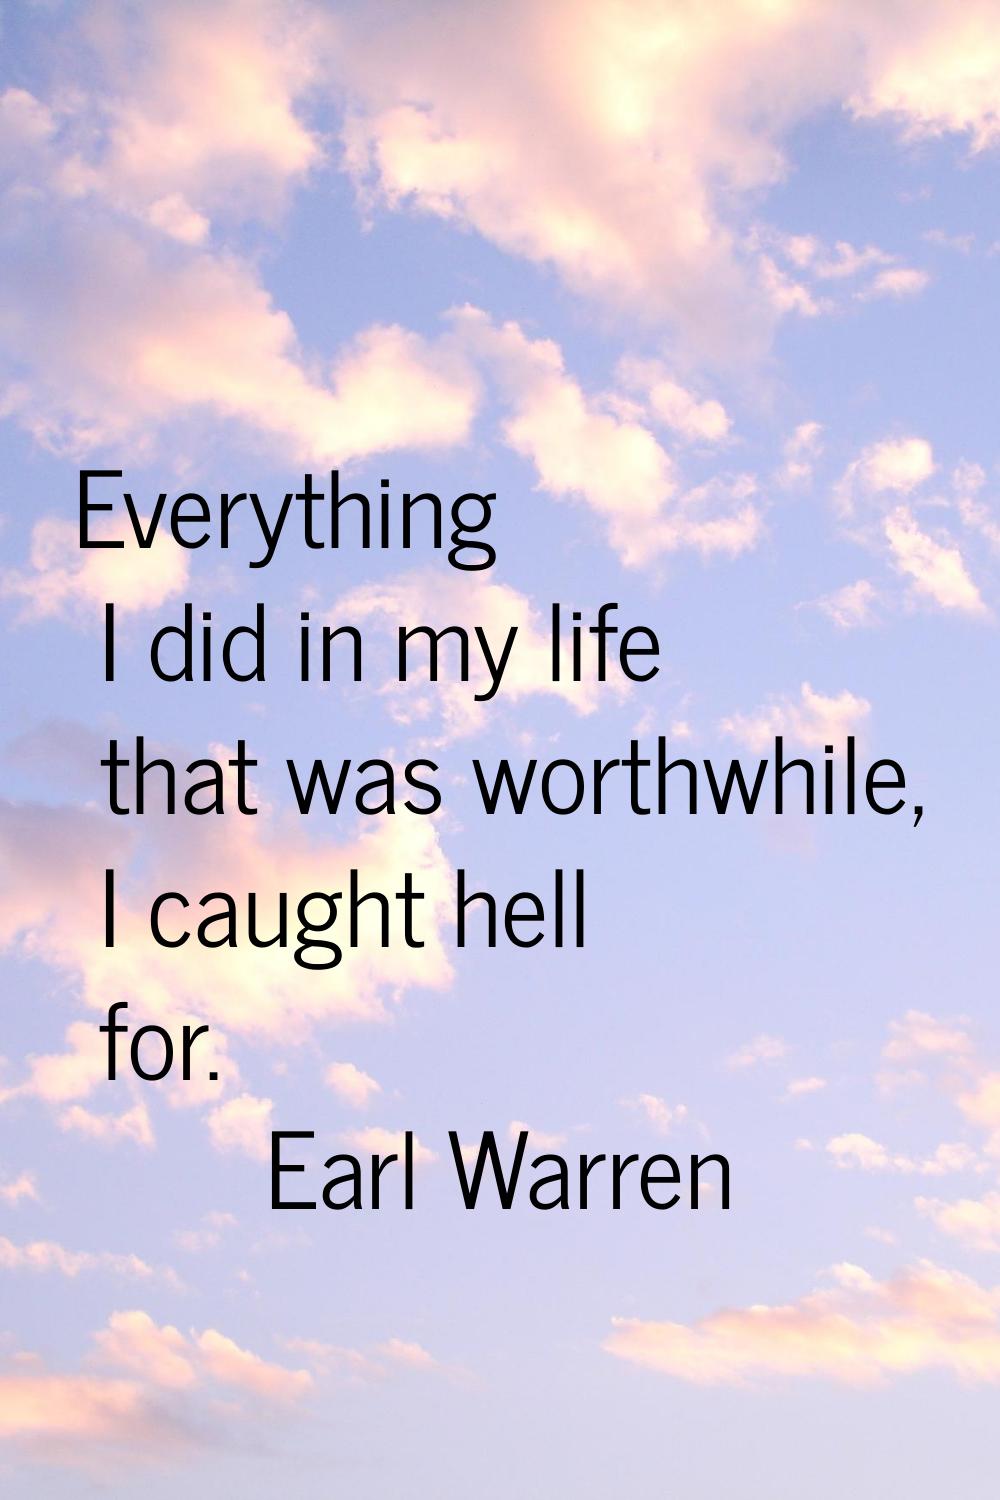 Everything I did in my life that was worthwhile, I caught hell for.